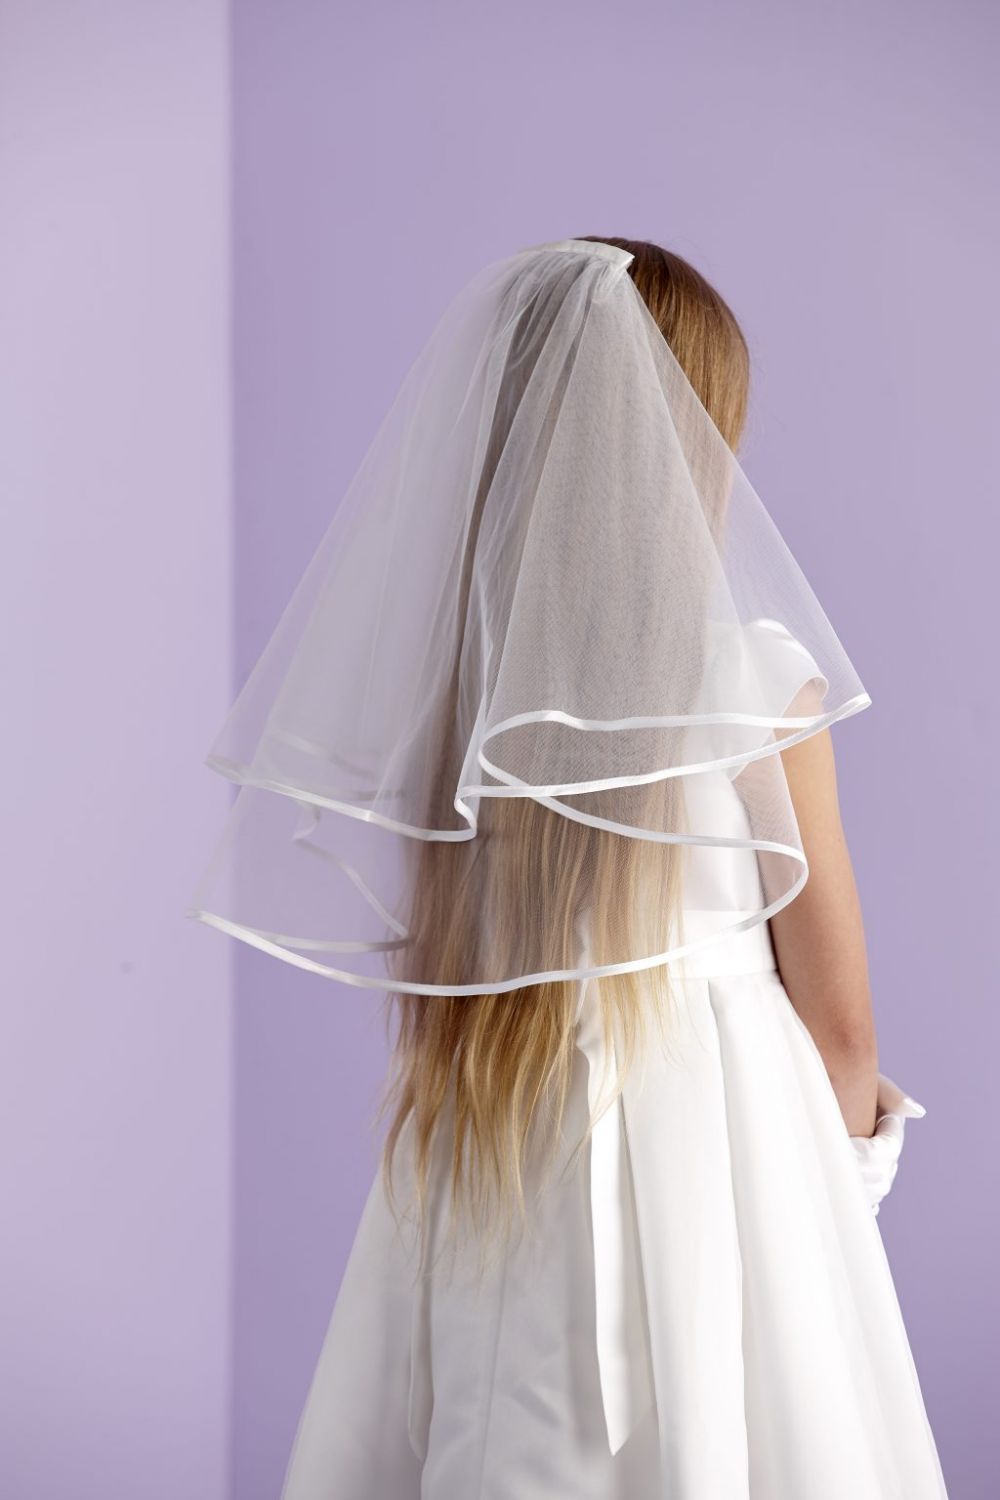 Classic two-tiered ivory communion veil with satin edge